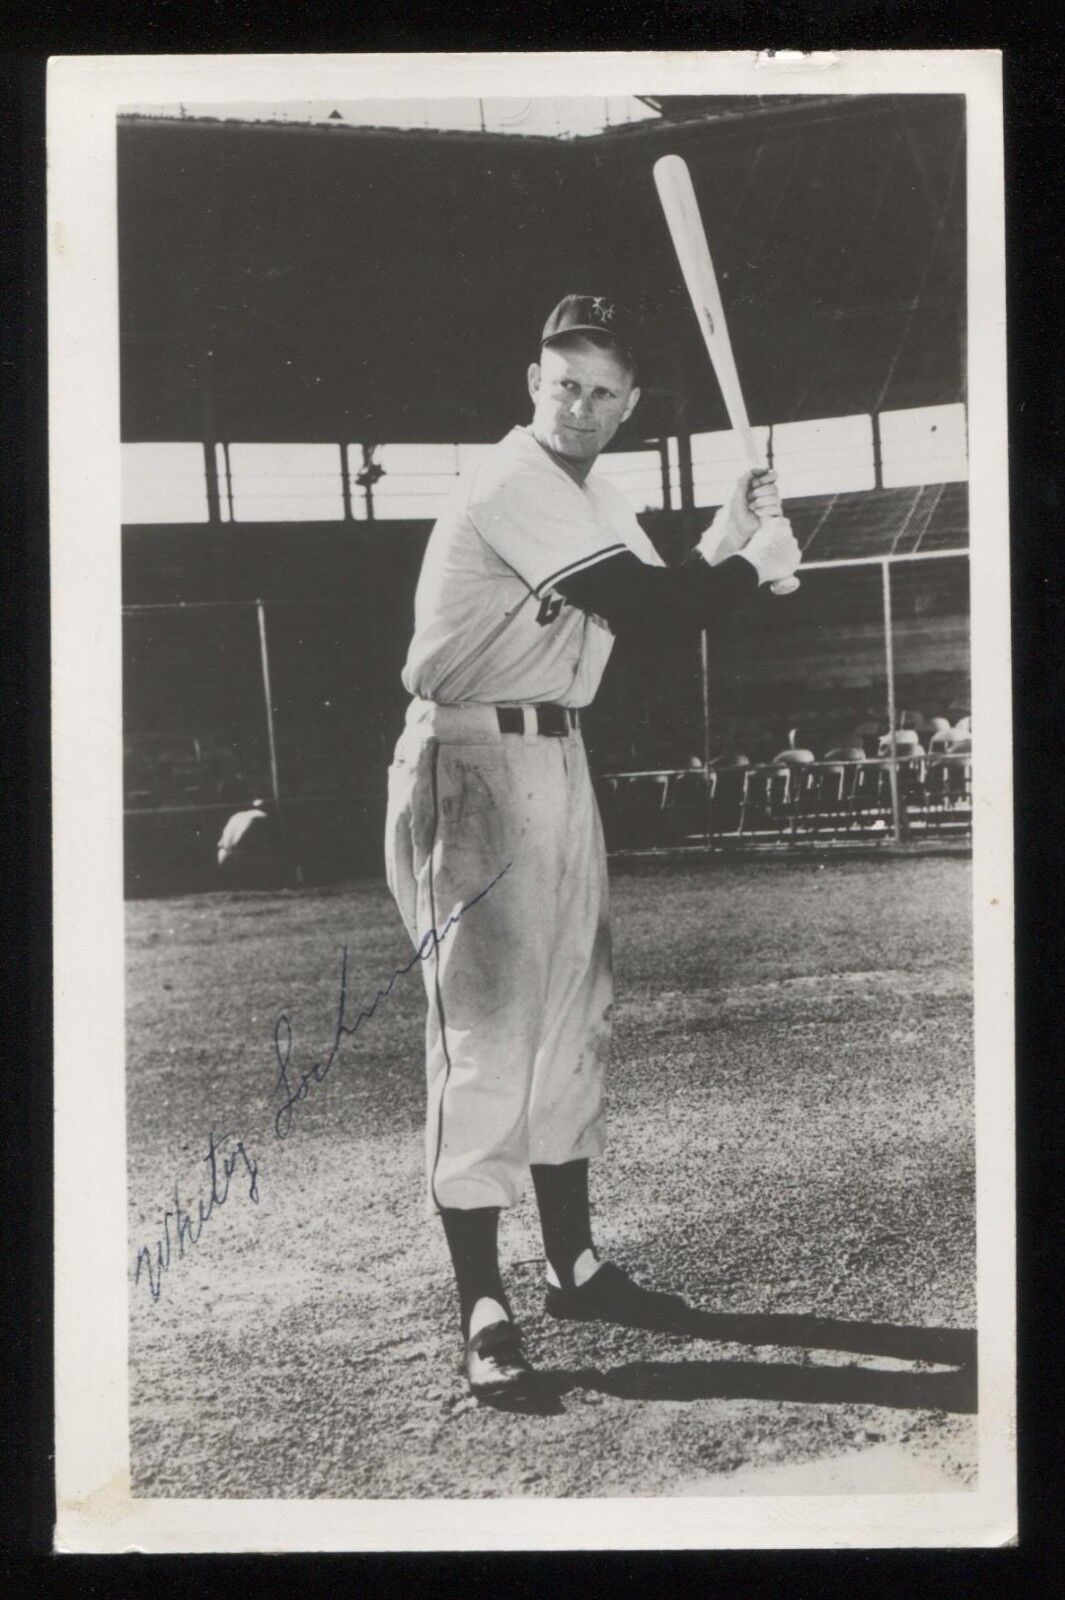 Whitey Lockman Vintage Signed Photo Post Card Autographed in 1951 Baseball 